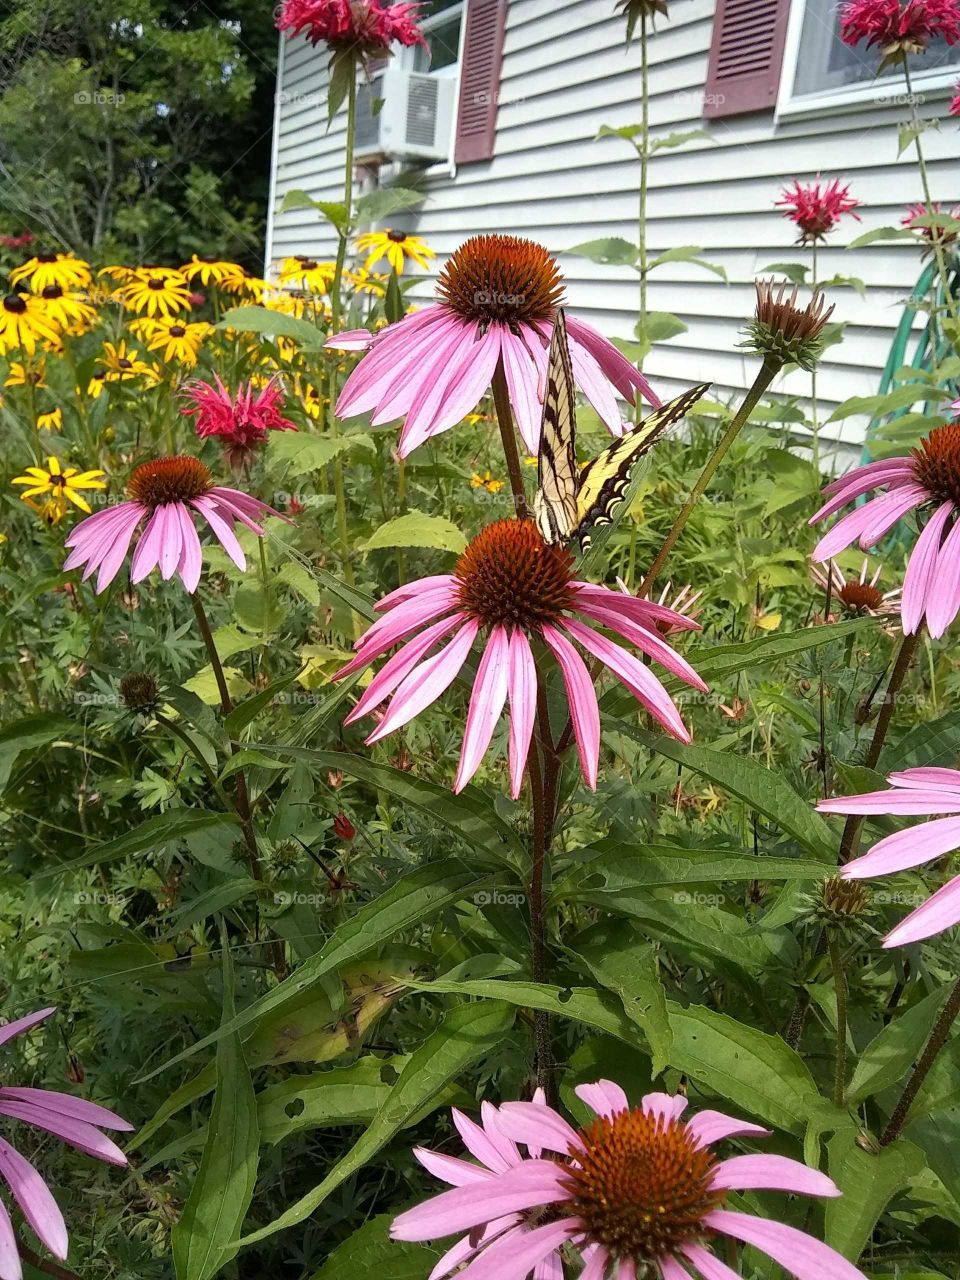 Purple Coneflower with a visitor